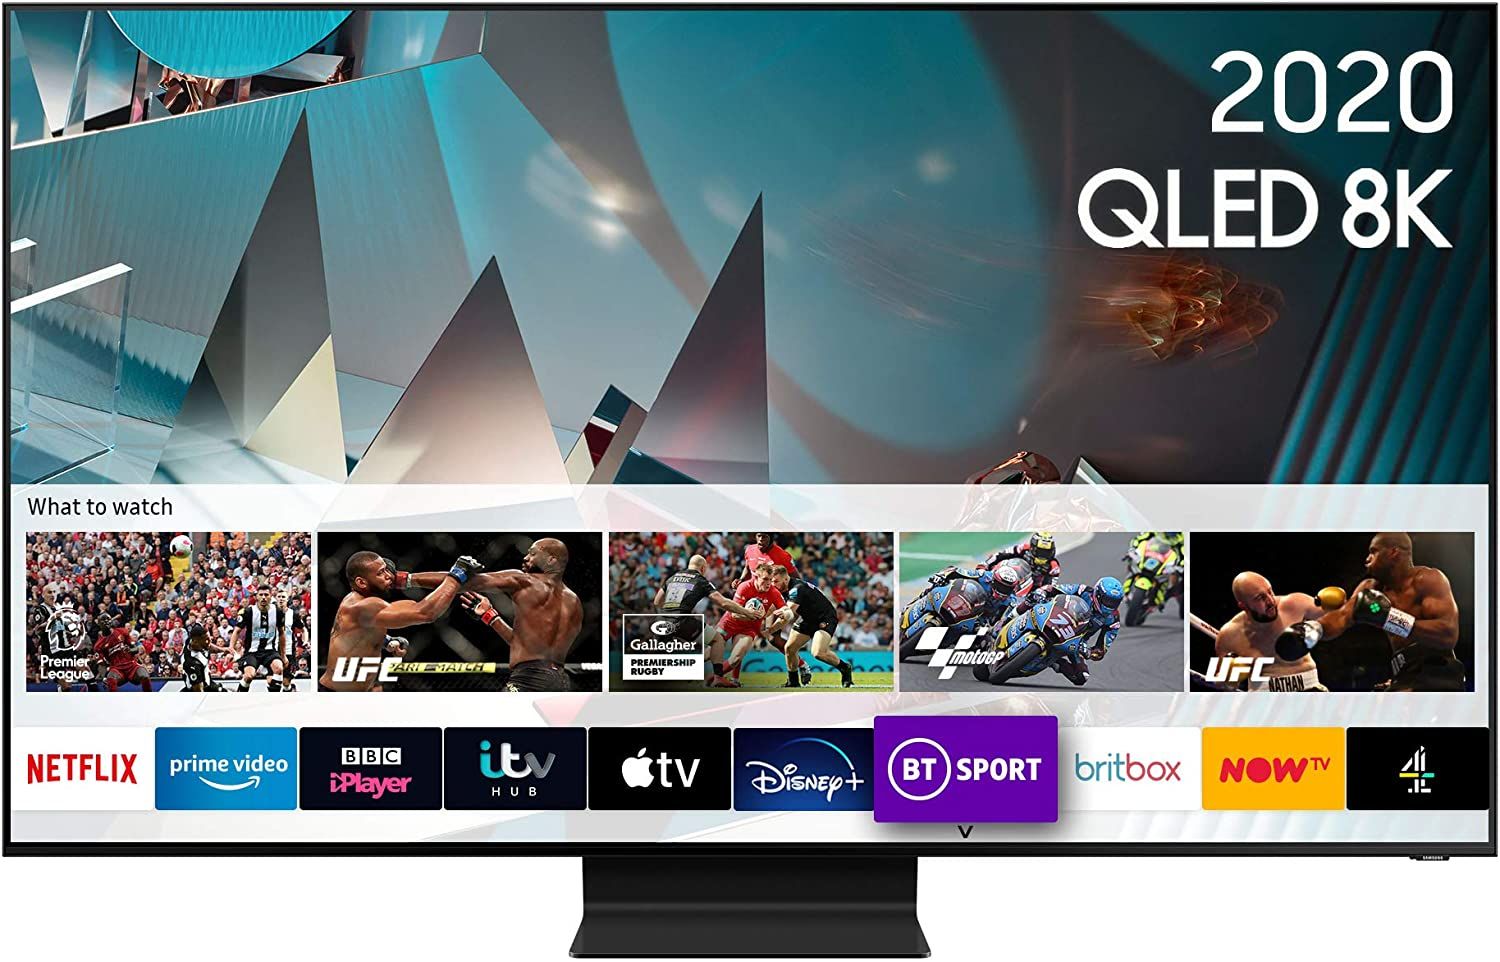 Image of Samsung Q800TV displaying triangles below an overlay with various streaming applications, with a focus on upcoming sporting events